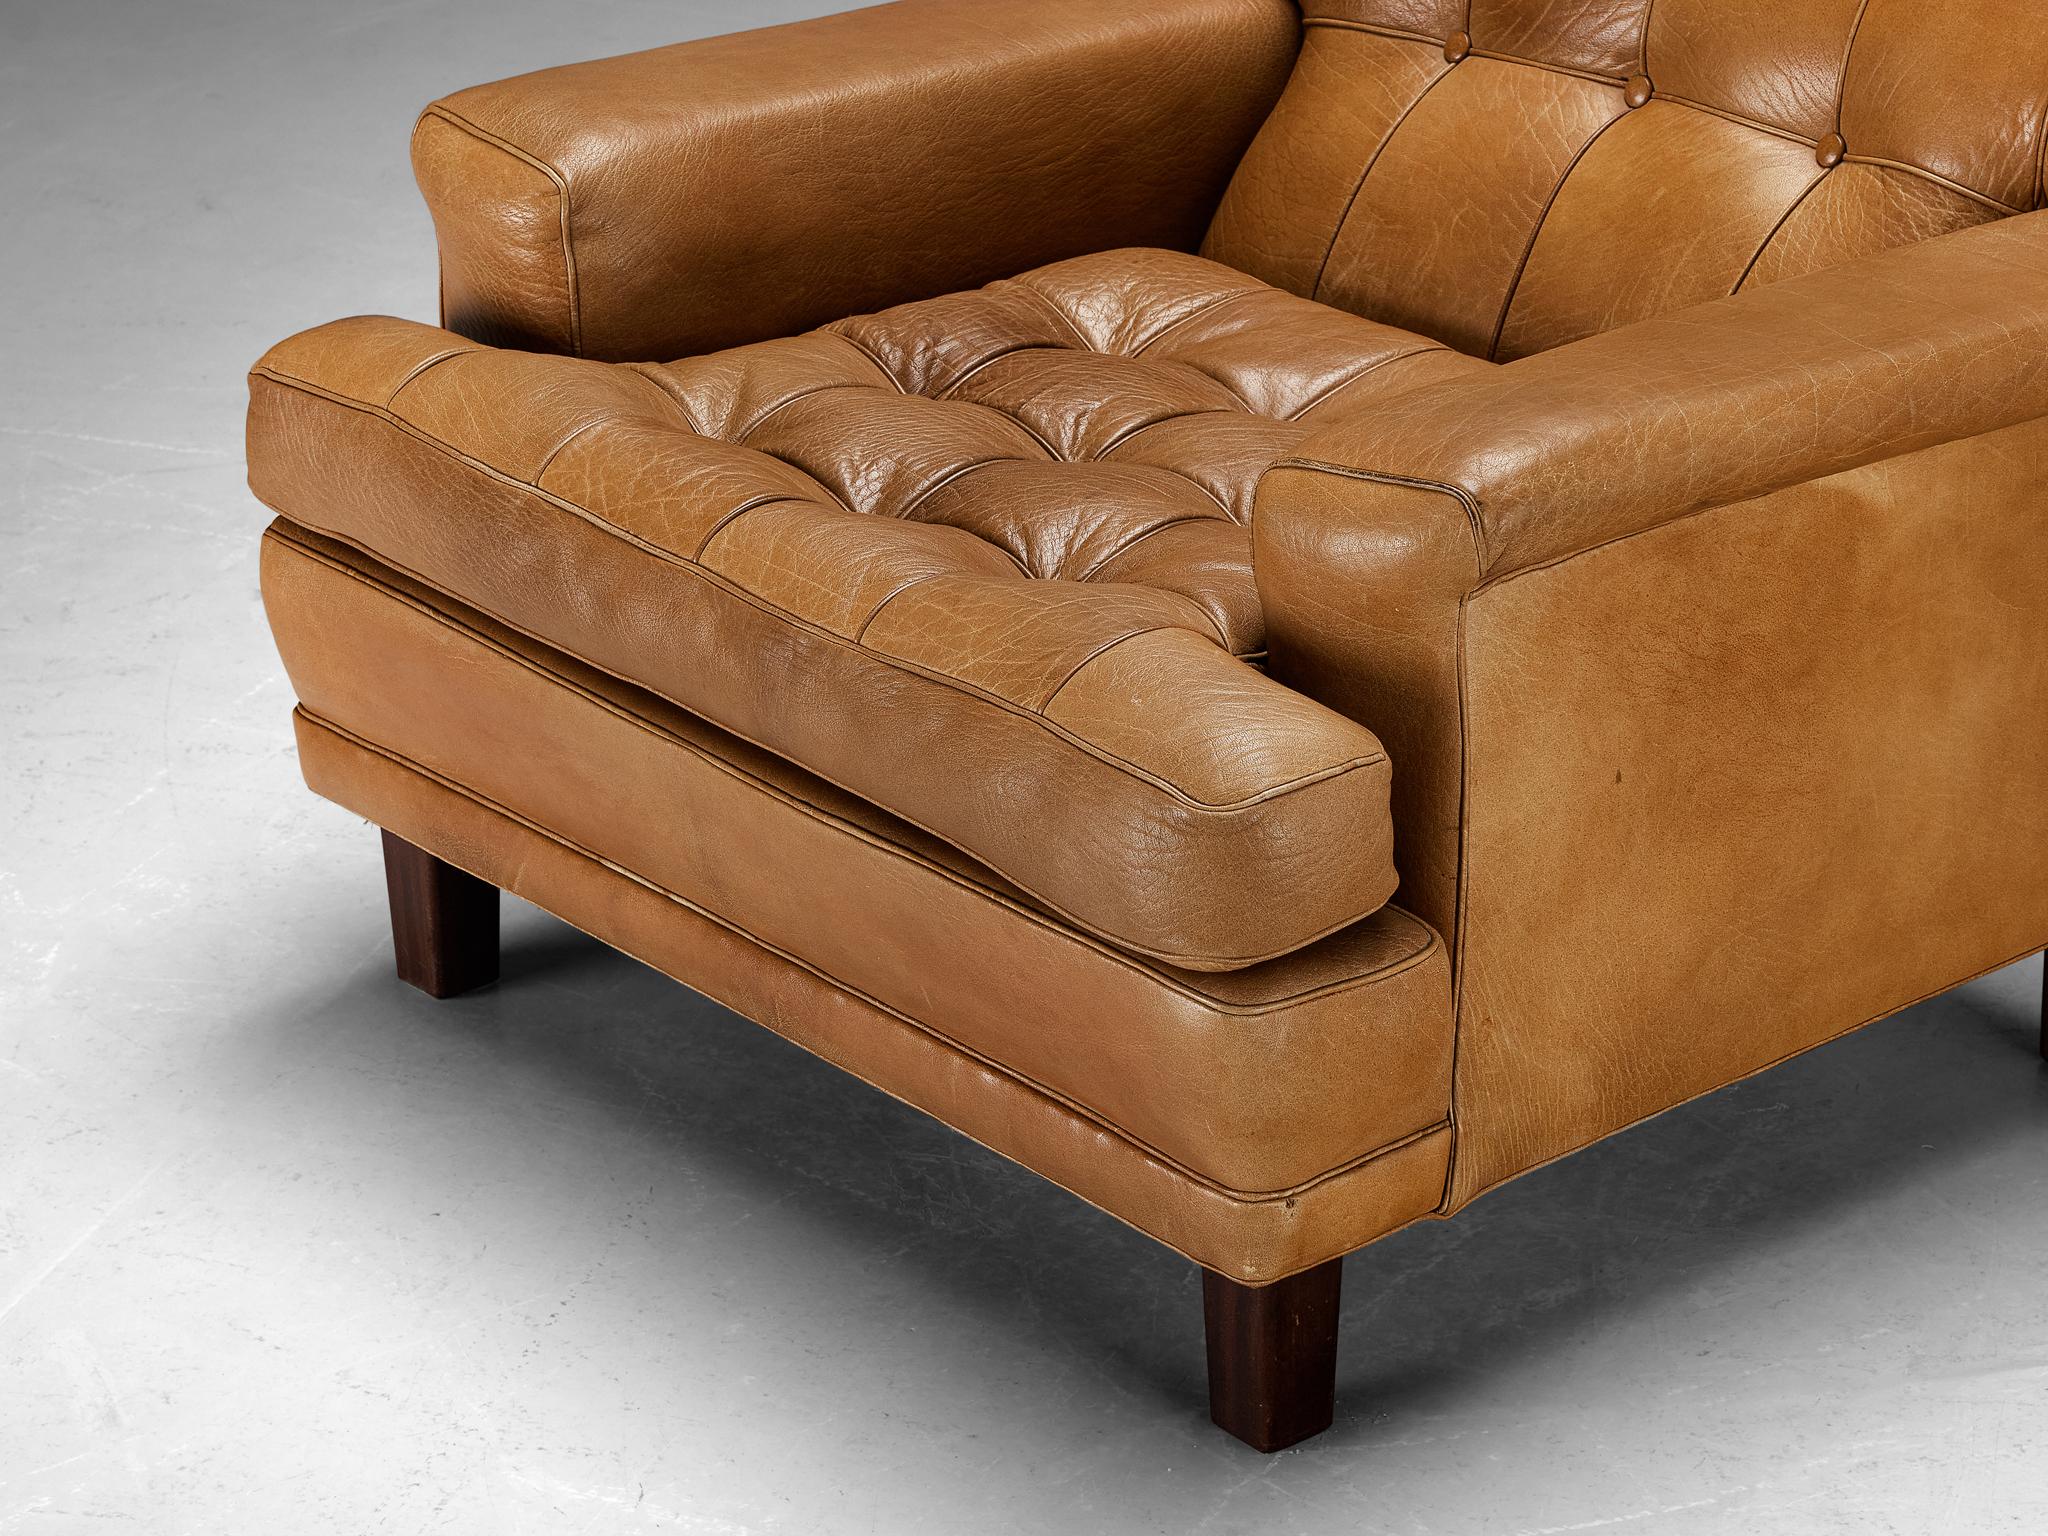 Arne Norell 'Merkur' Lounge Chair in Cognac Leather and Mahogany